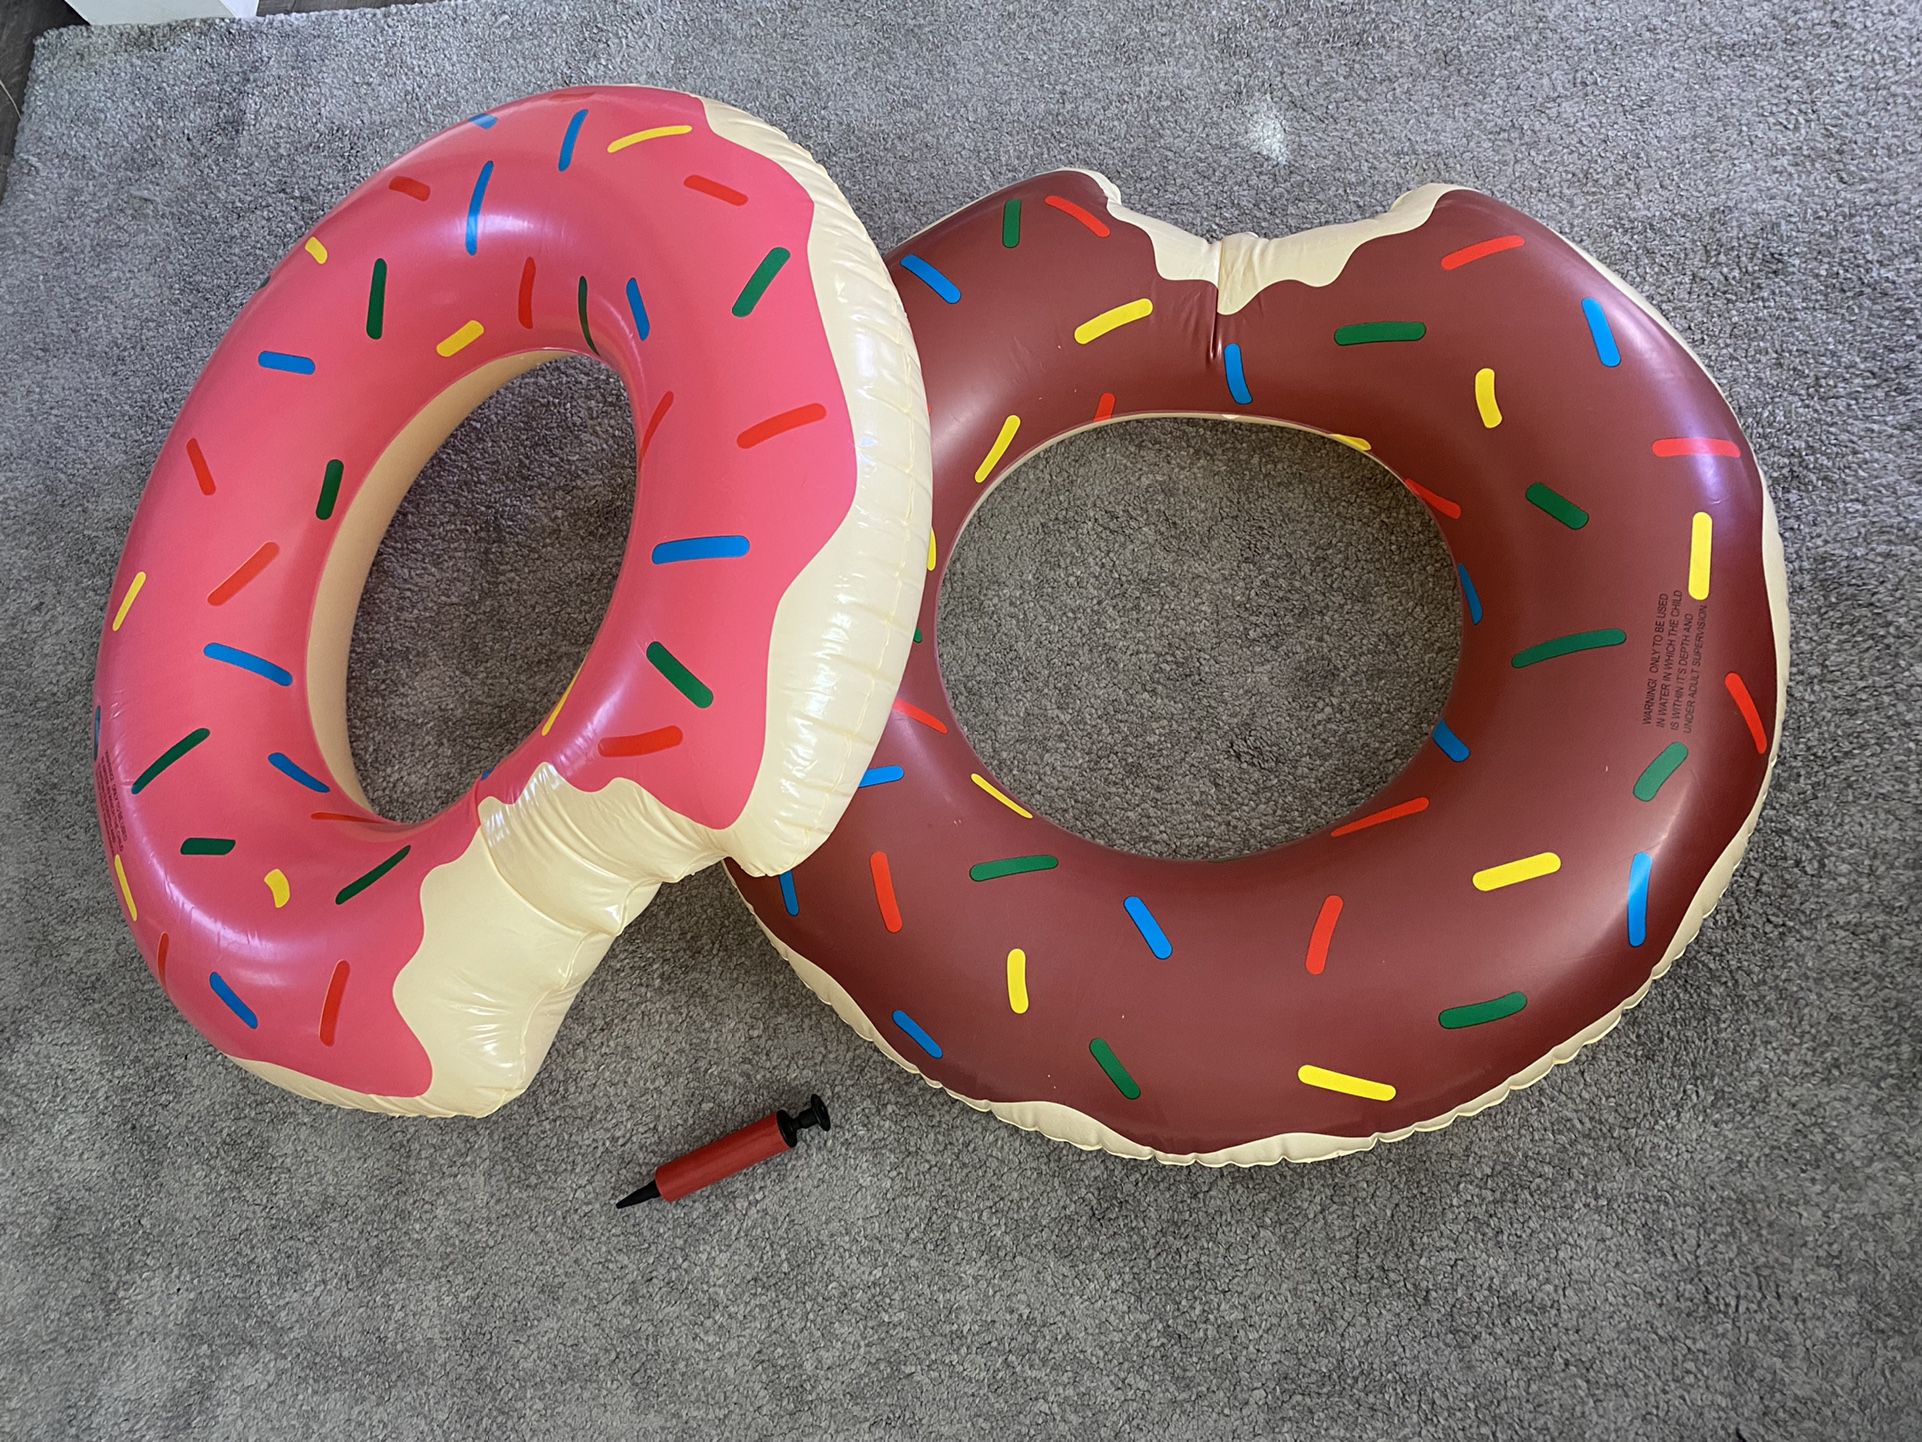 2x Inflatable Pool Float With Manual Hand Air Pump  - 2x Donut Style Floaties